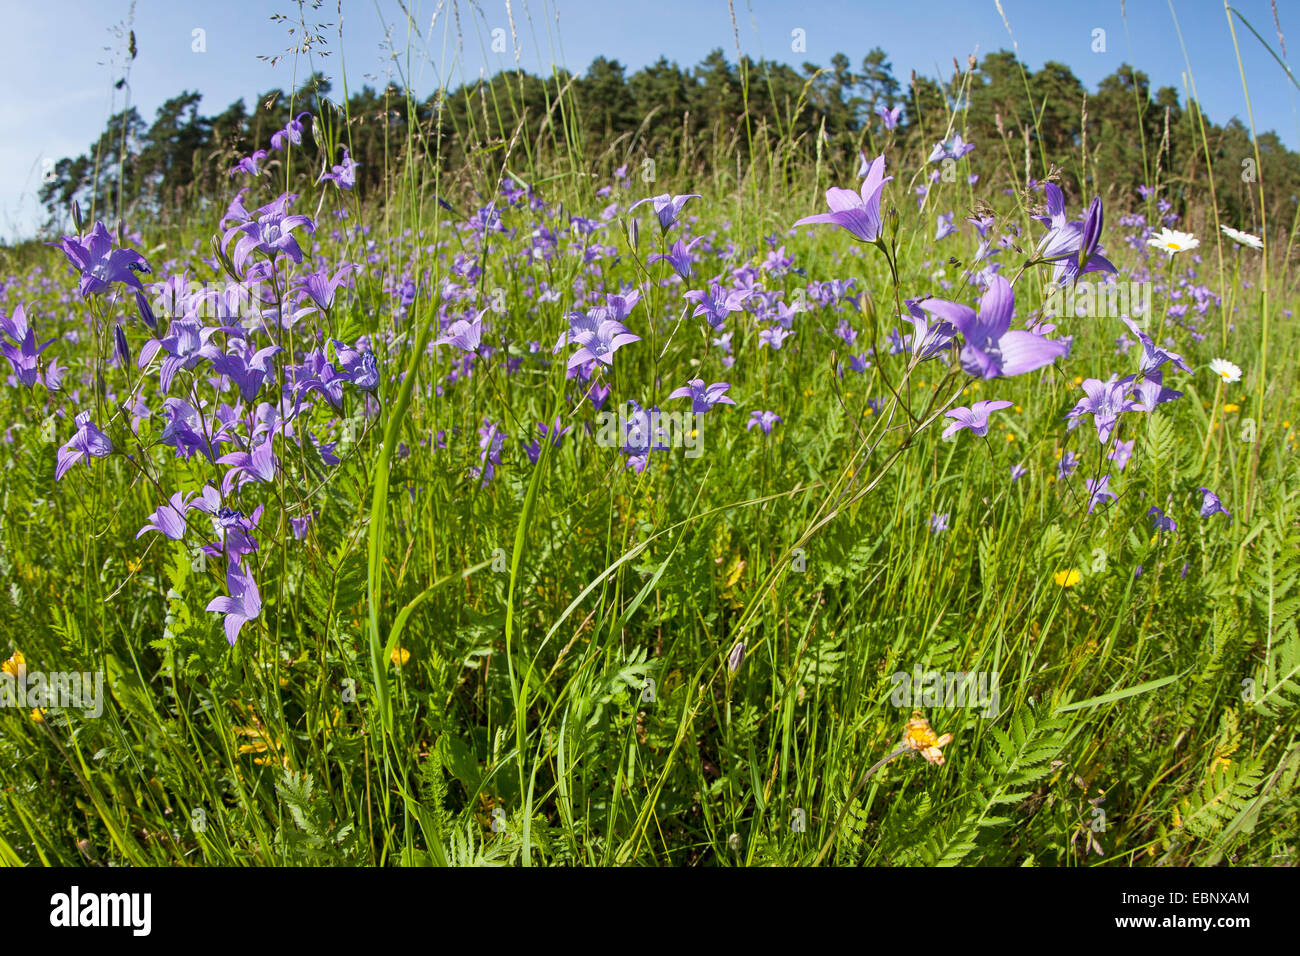 spreading bellflower (Campanula patula), blooming in a meadow, Germany Stock Photo